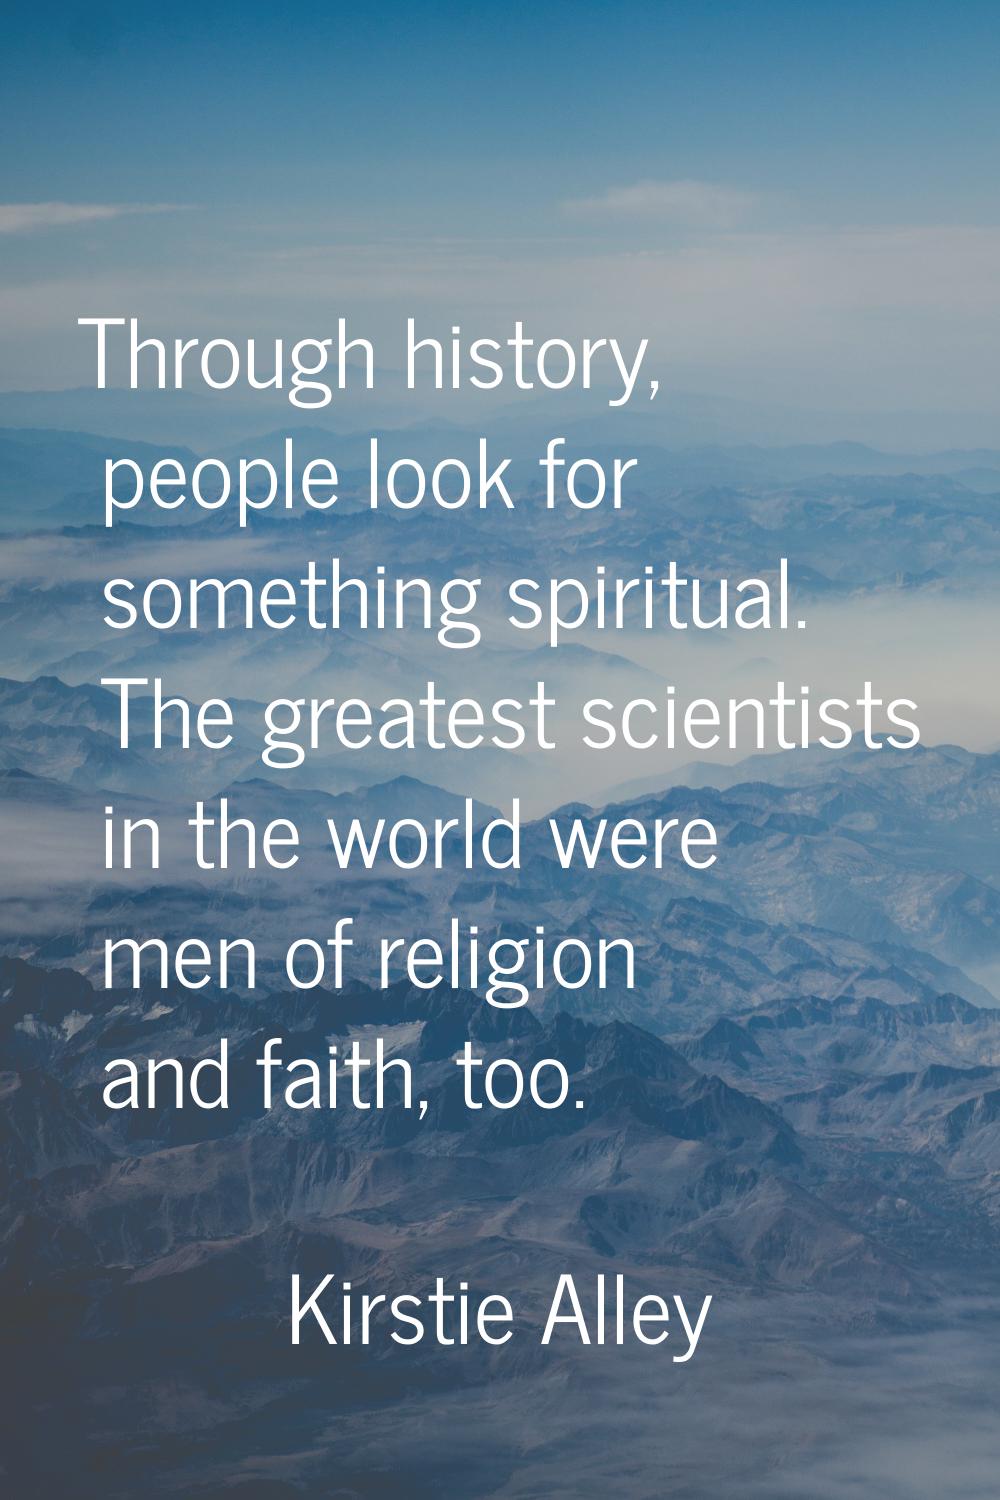 Through history, people look for something spiritual. The greatest scientists in the world were men